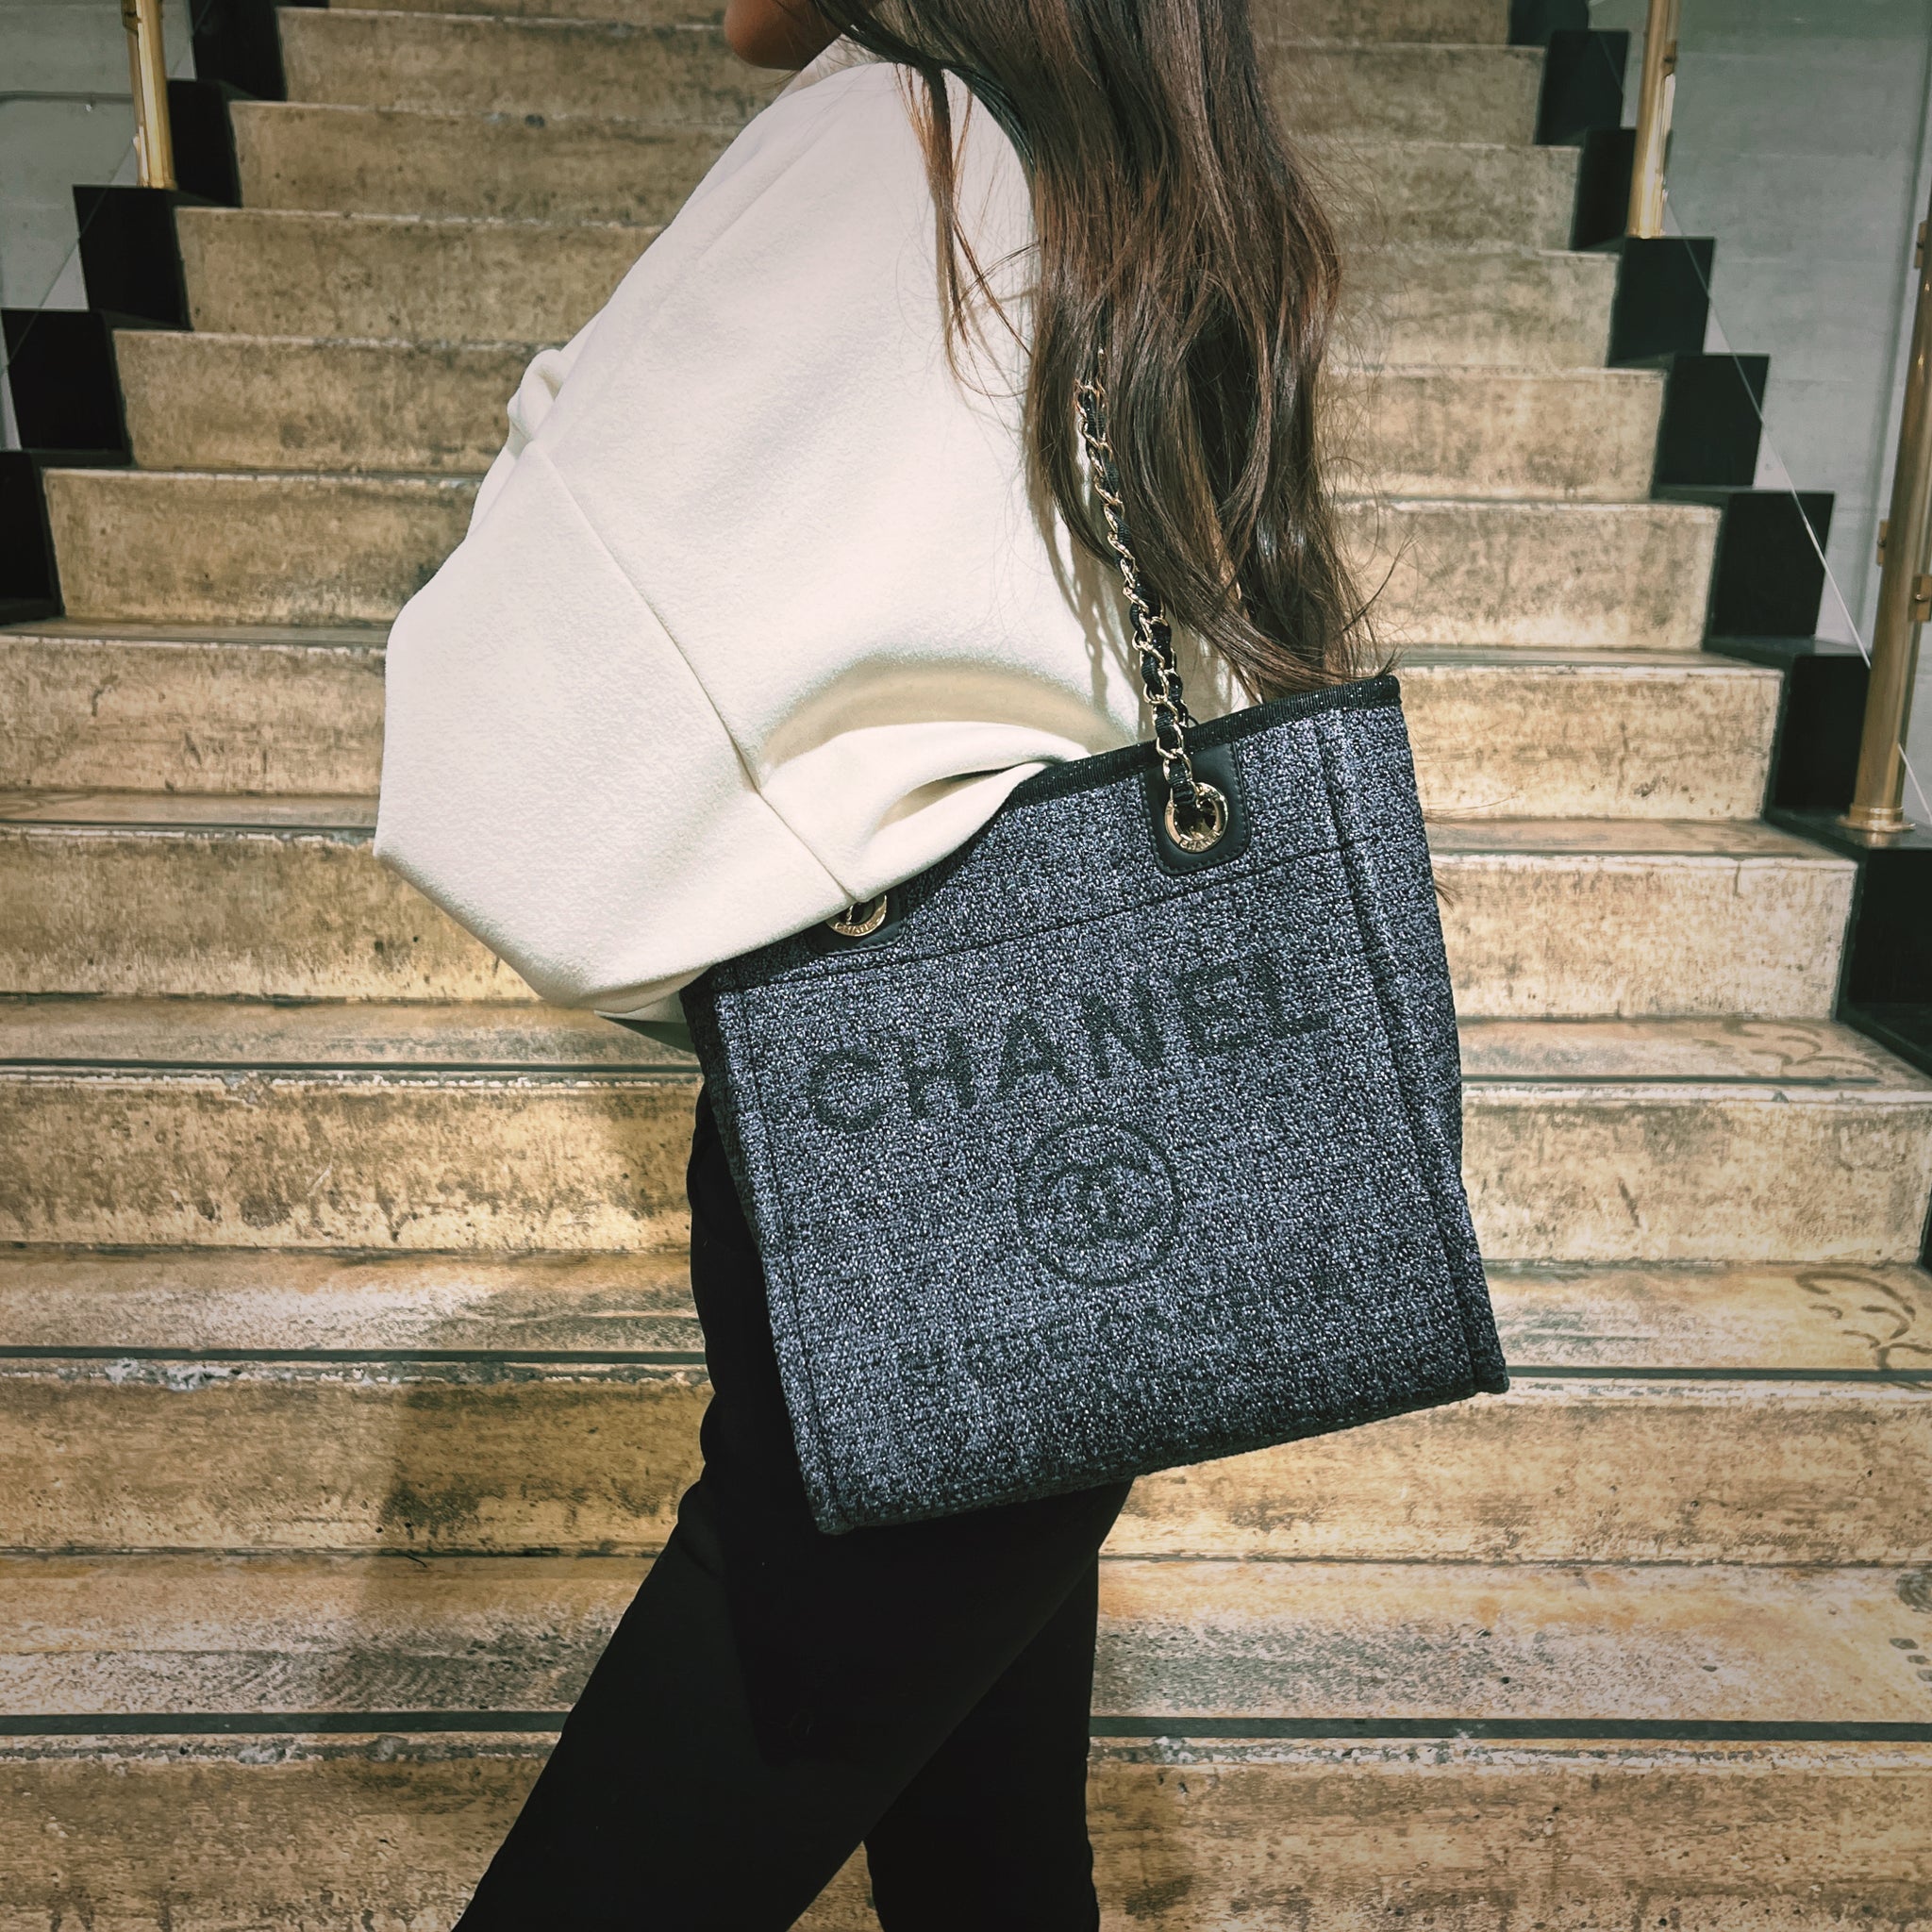 CHANEL Pre-Owned Deauville two-way Canvas Tote Bag - Farfetch